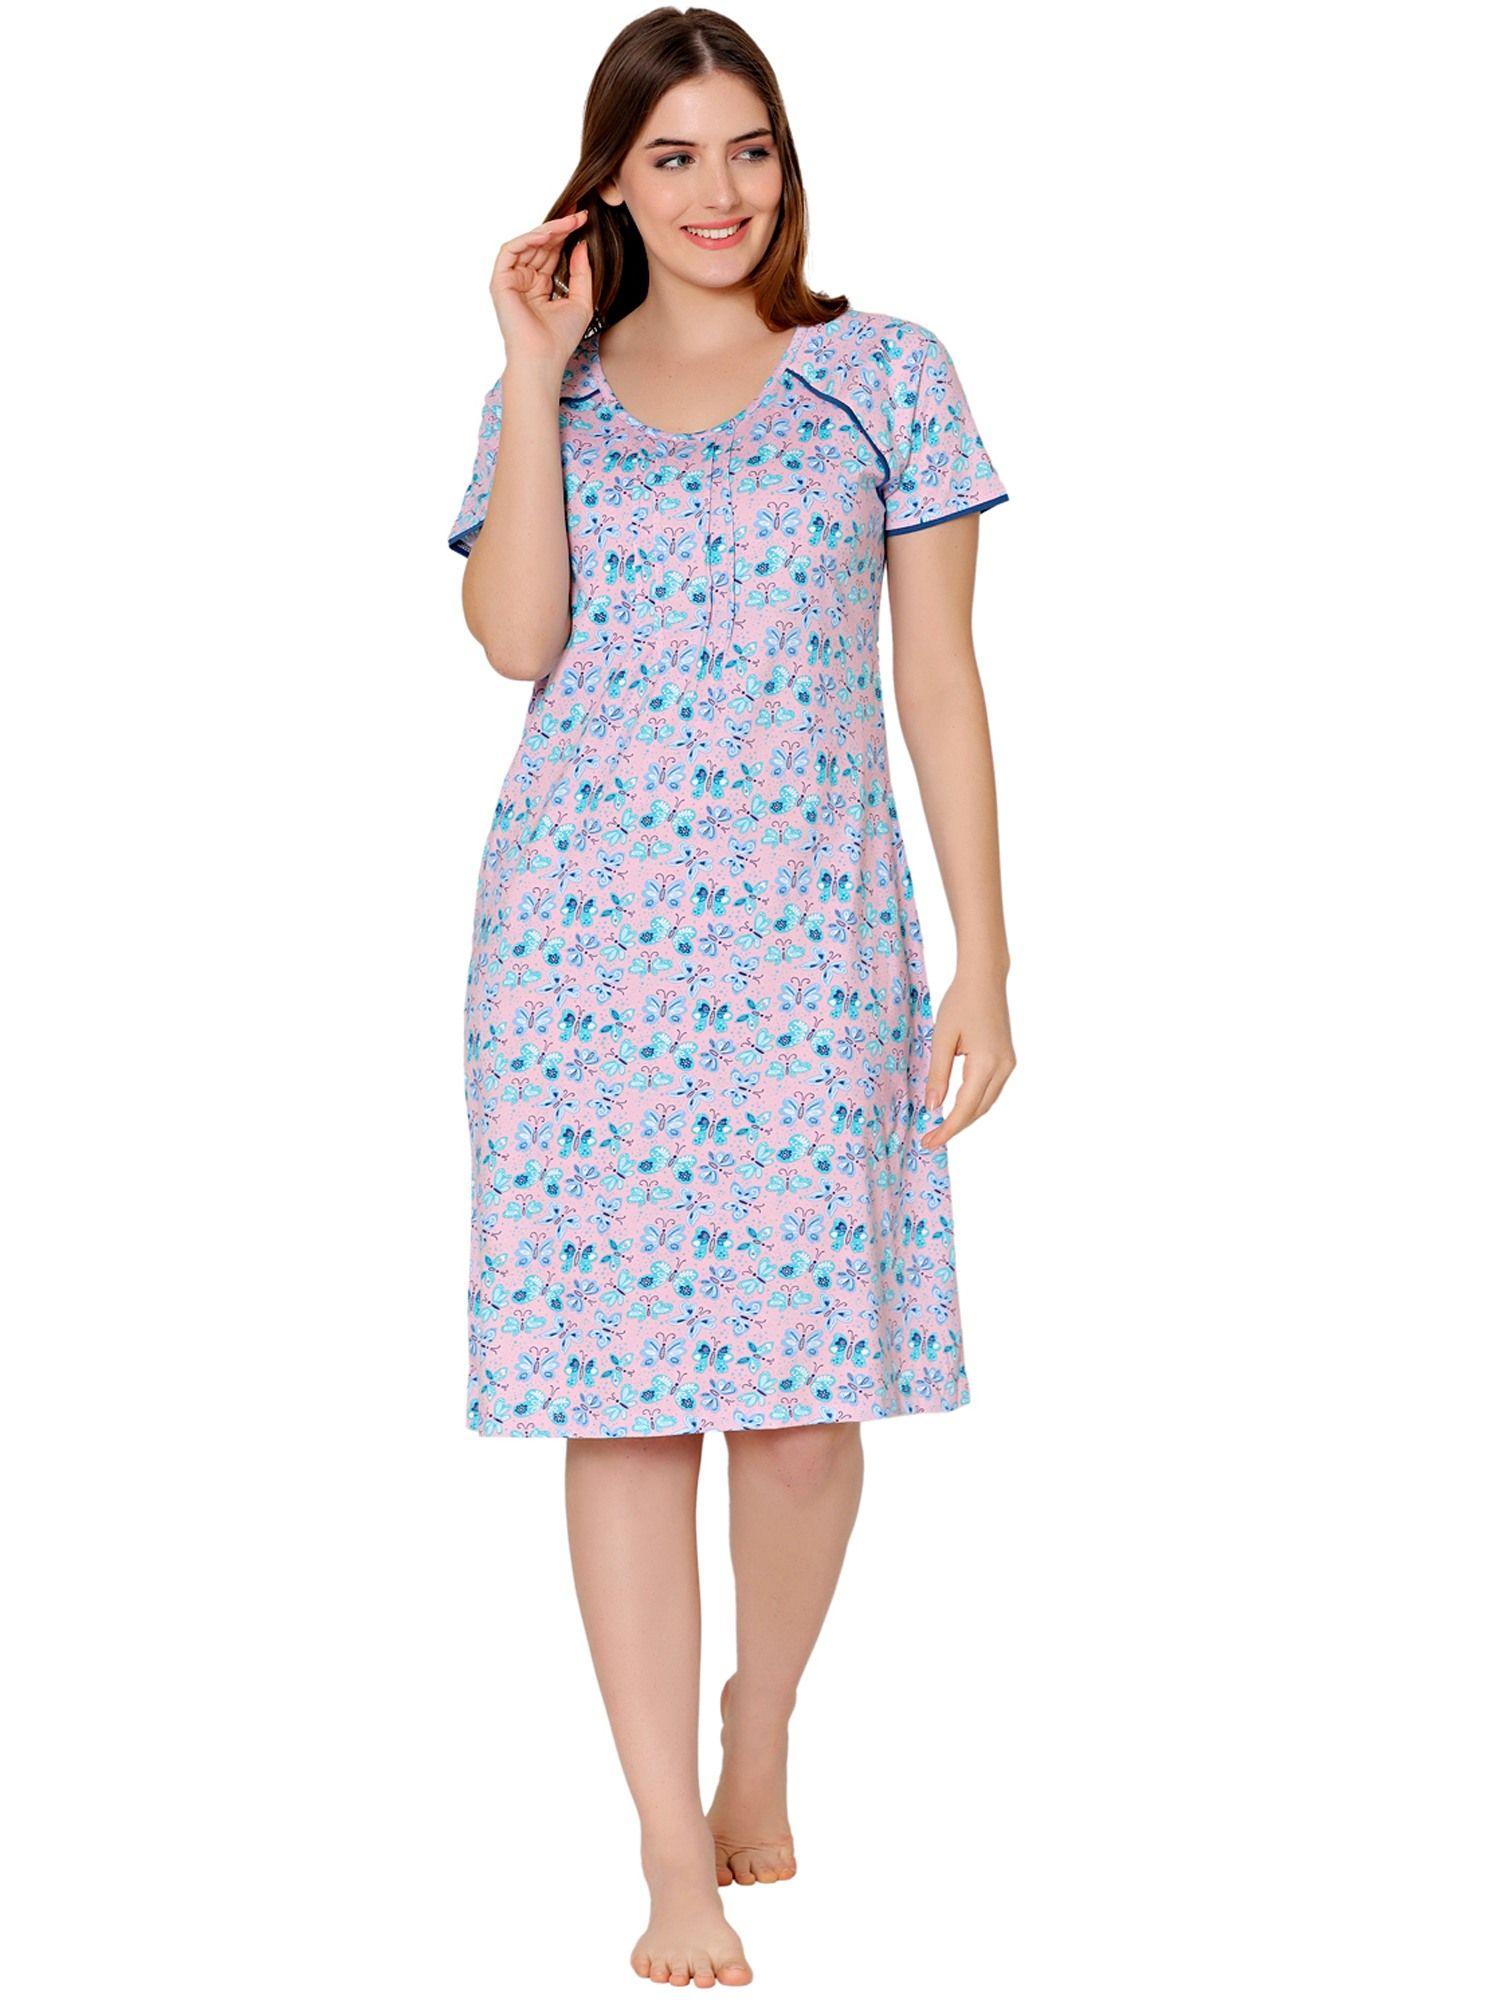 womens combed cotton round neck printed short night dress -bsn9011 pink